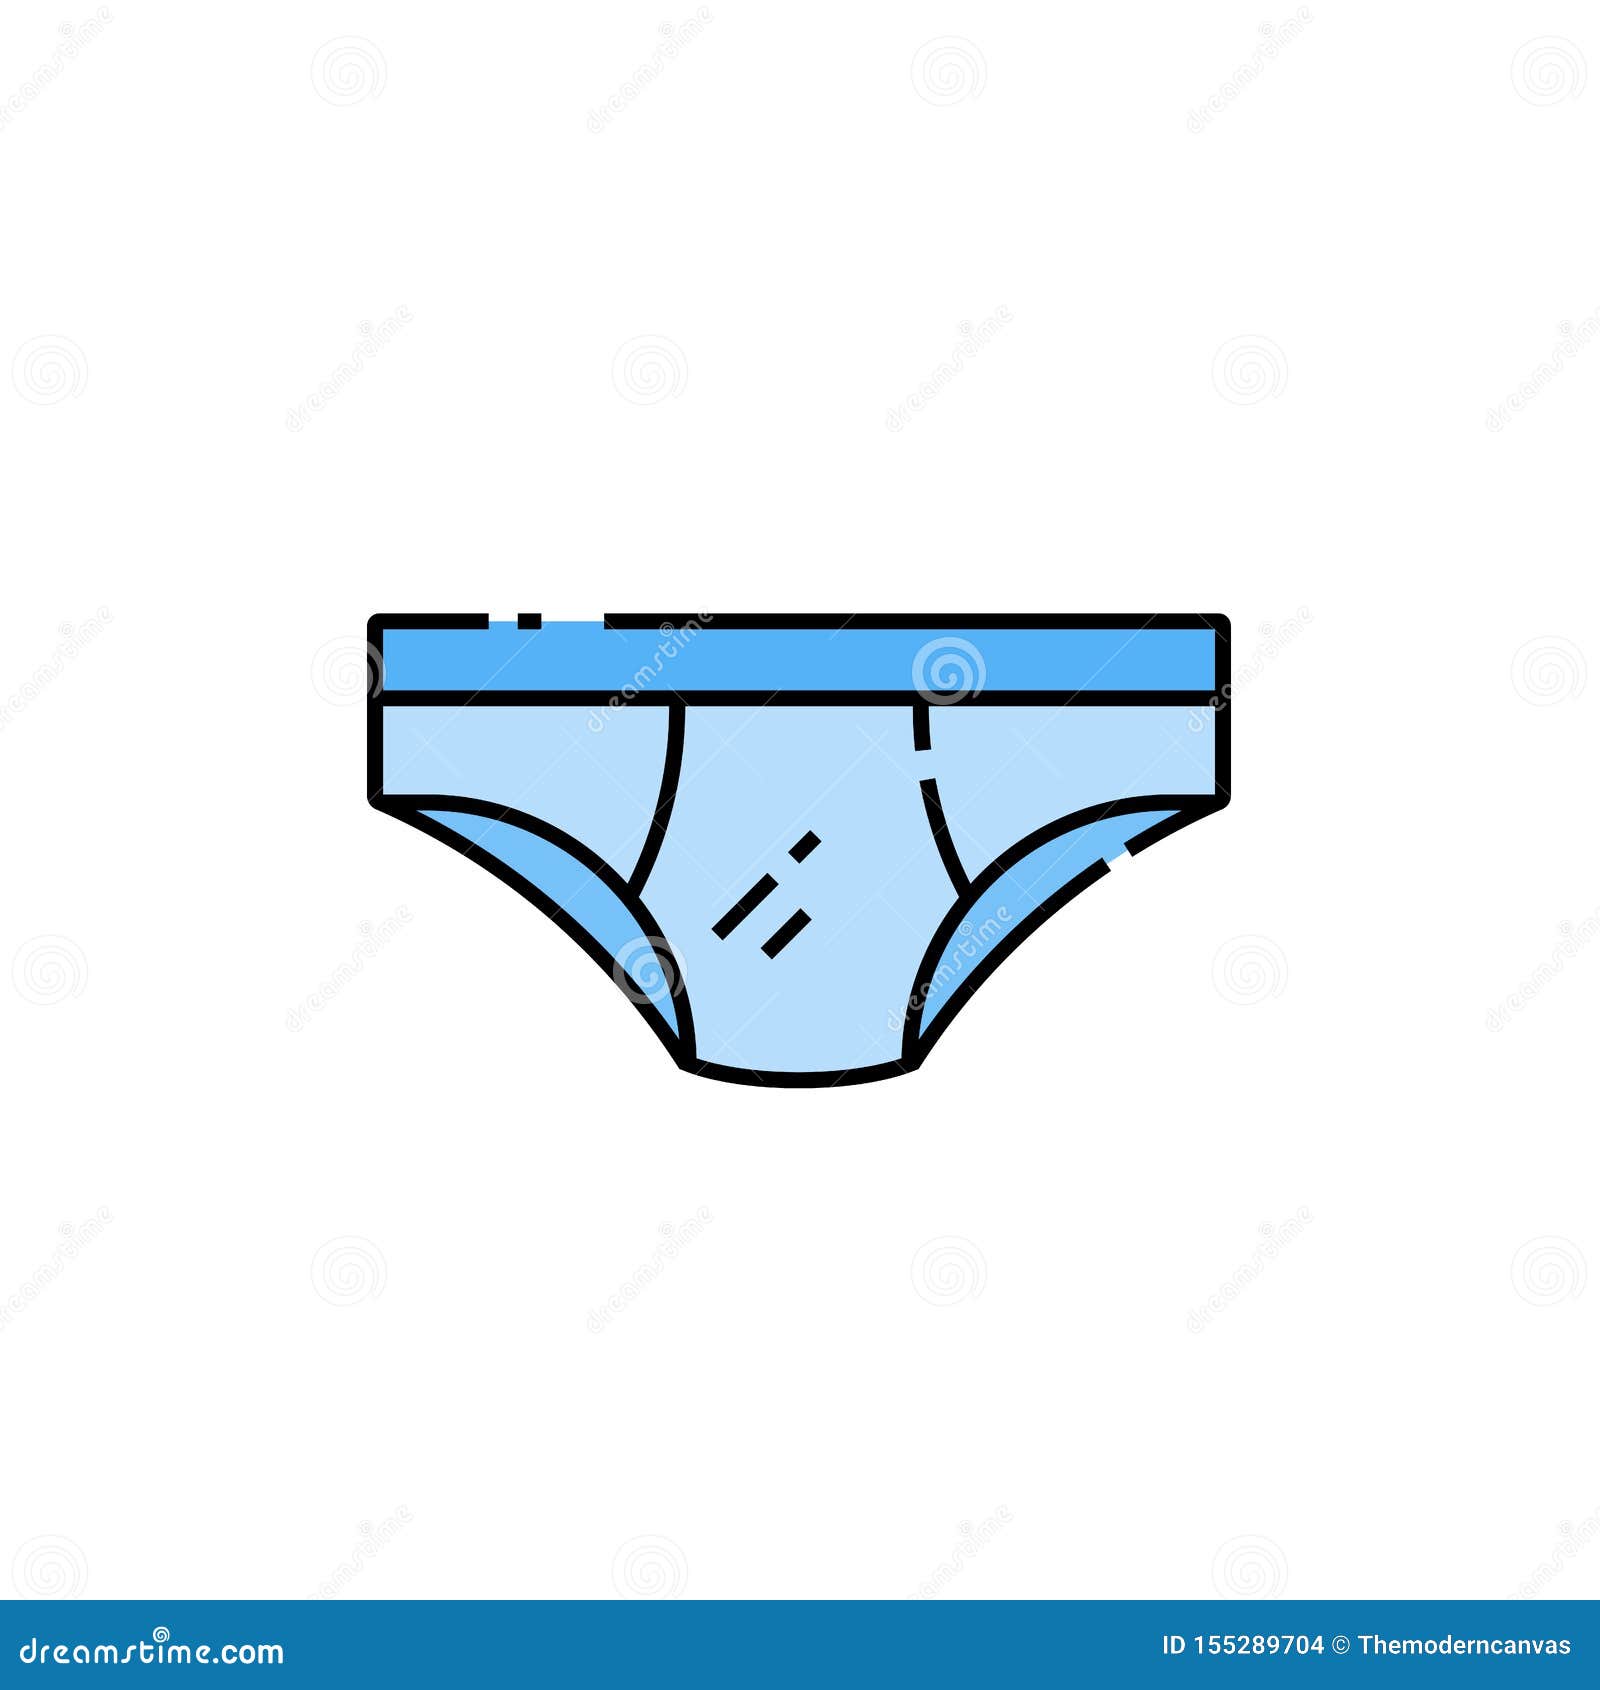 Mens underpants line icon stock vector. Illustration of shape - 155289704